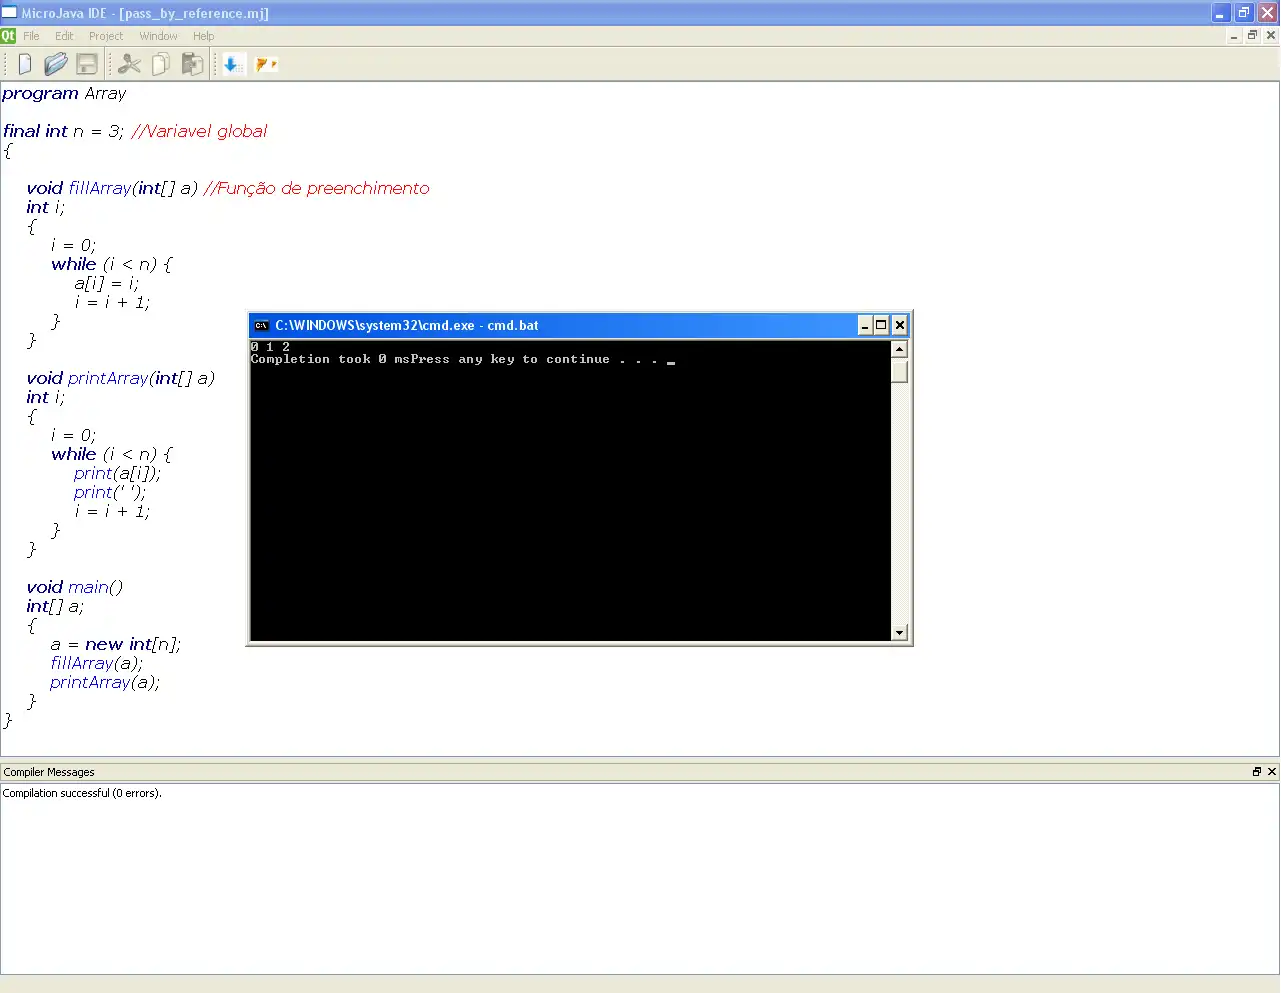 Download web tool or web app MicroJava Compiler and IDE